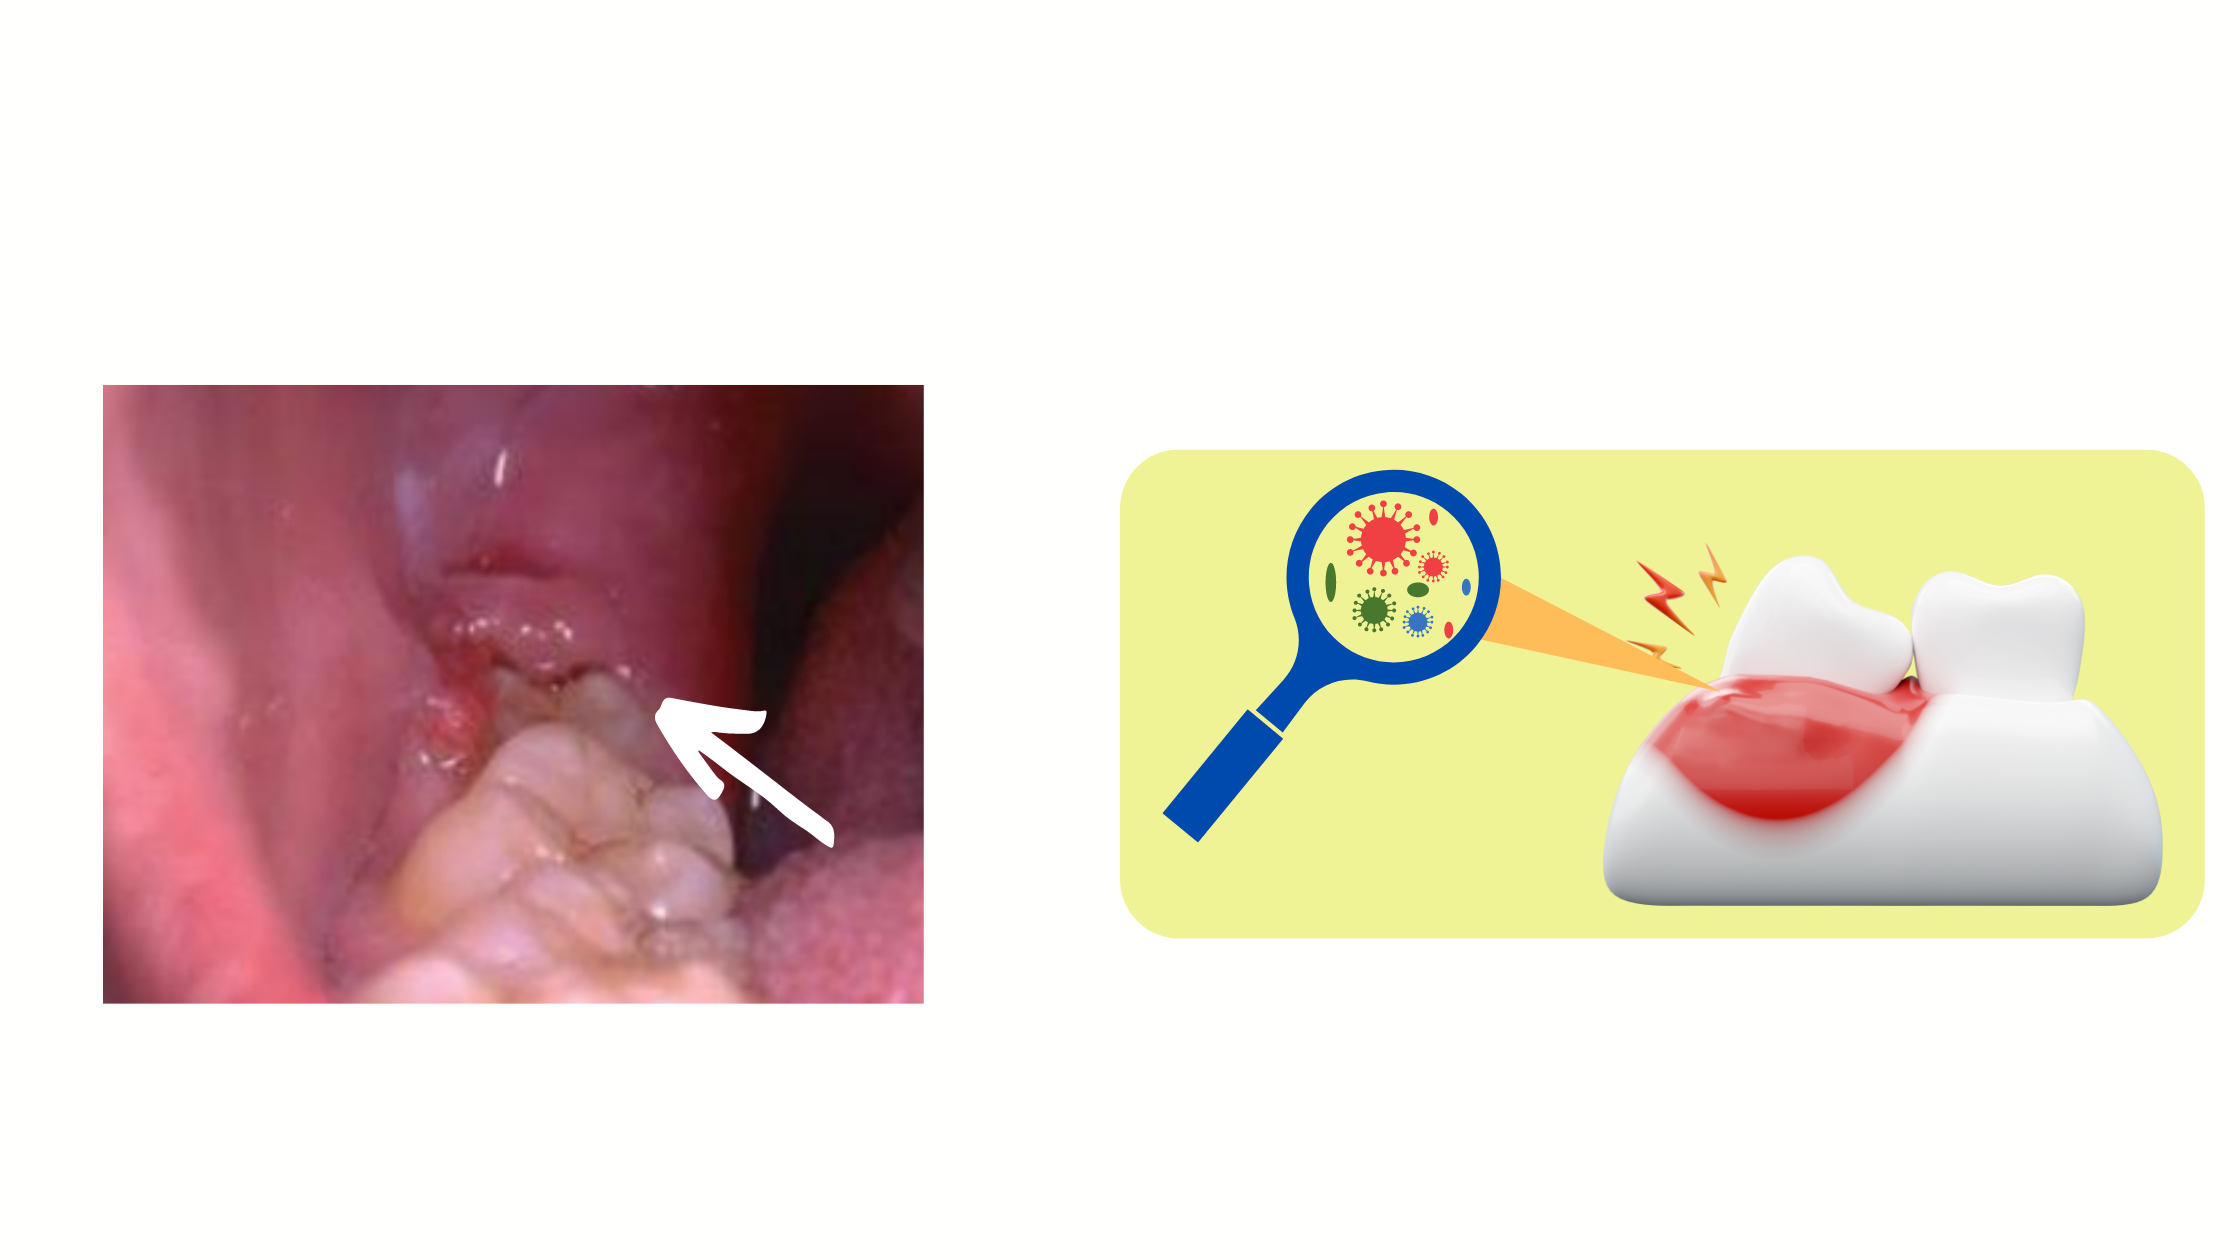 Pericoronitis: inflammation of the gums covering a partially erupted wisdom tooth